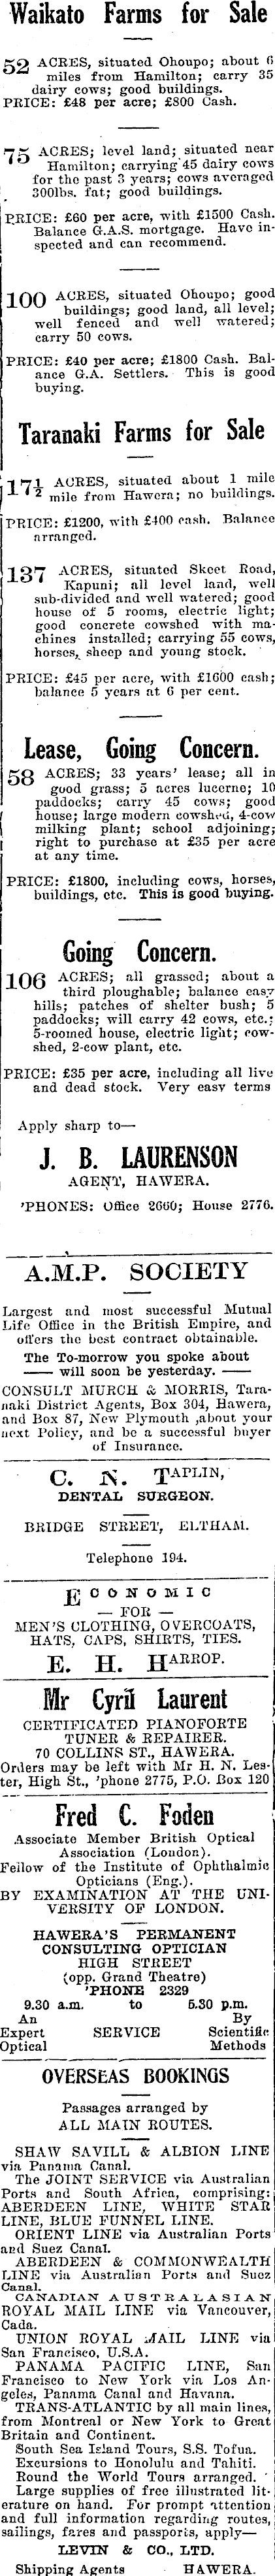 Papers Past Newspapers Hawera Star 7 June 1930 Page 4 Advertisements Column 2